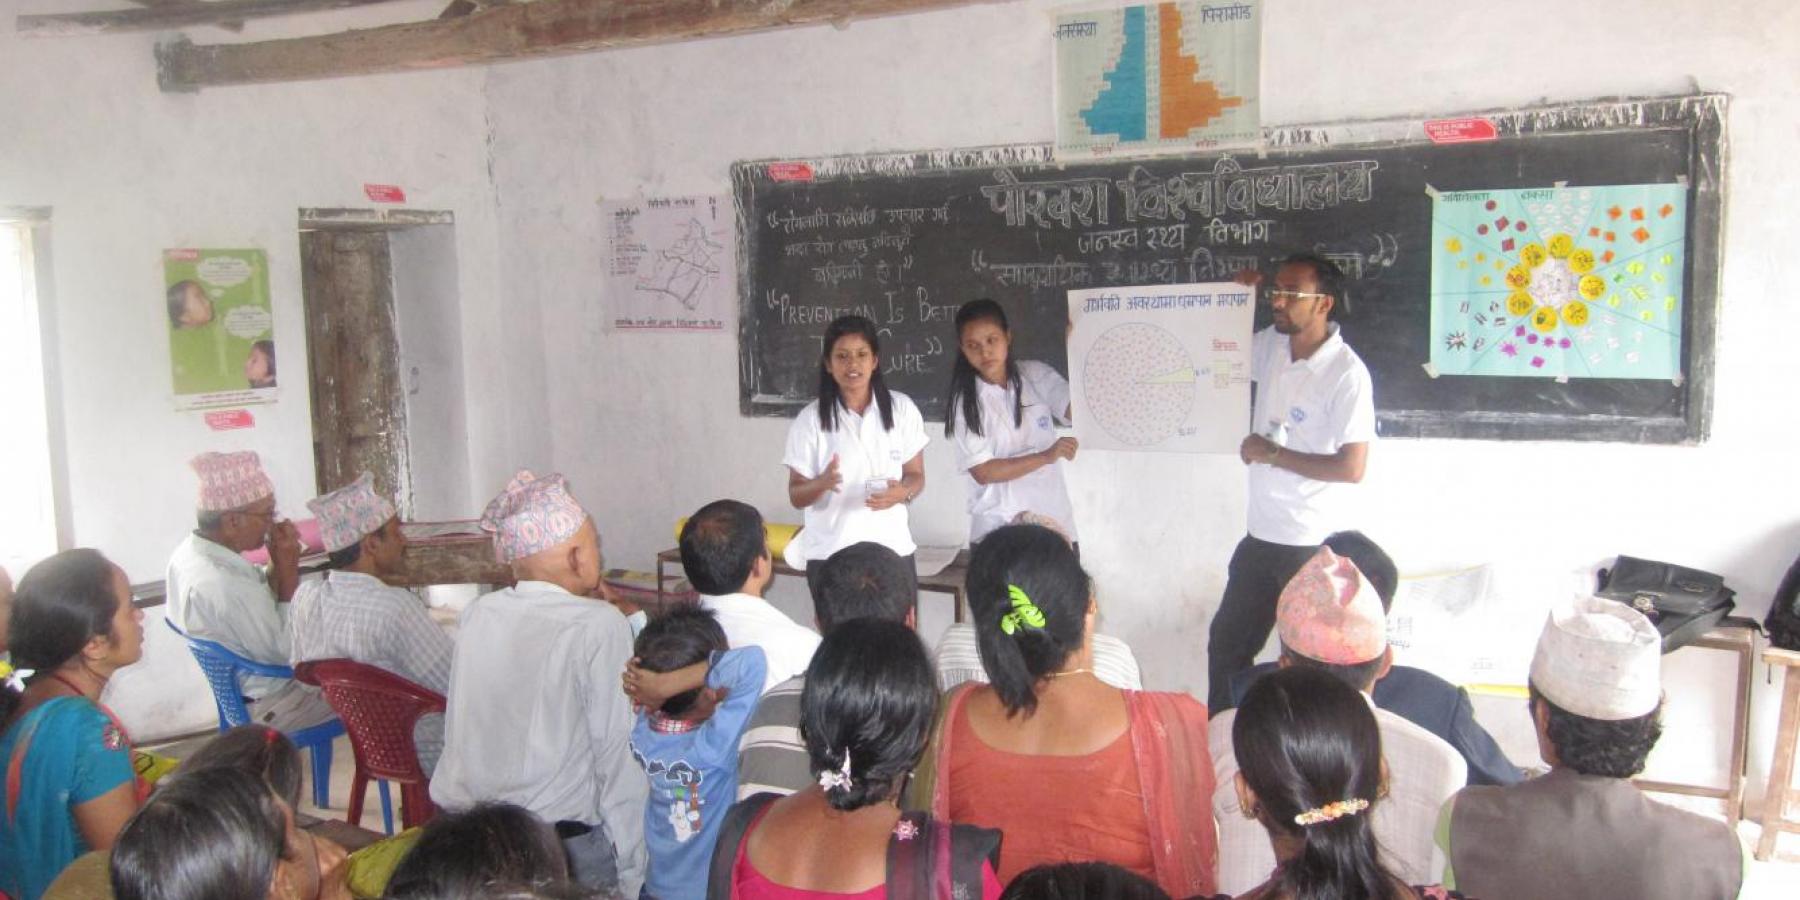 Health volunteers explain a pie chart with data on pregnant women's consumption of tobacco and alcohol to community members in Chidipani, Palpa, Nepal.